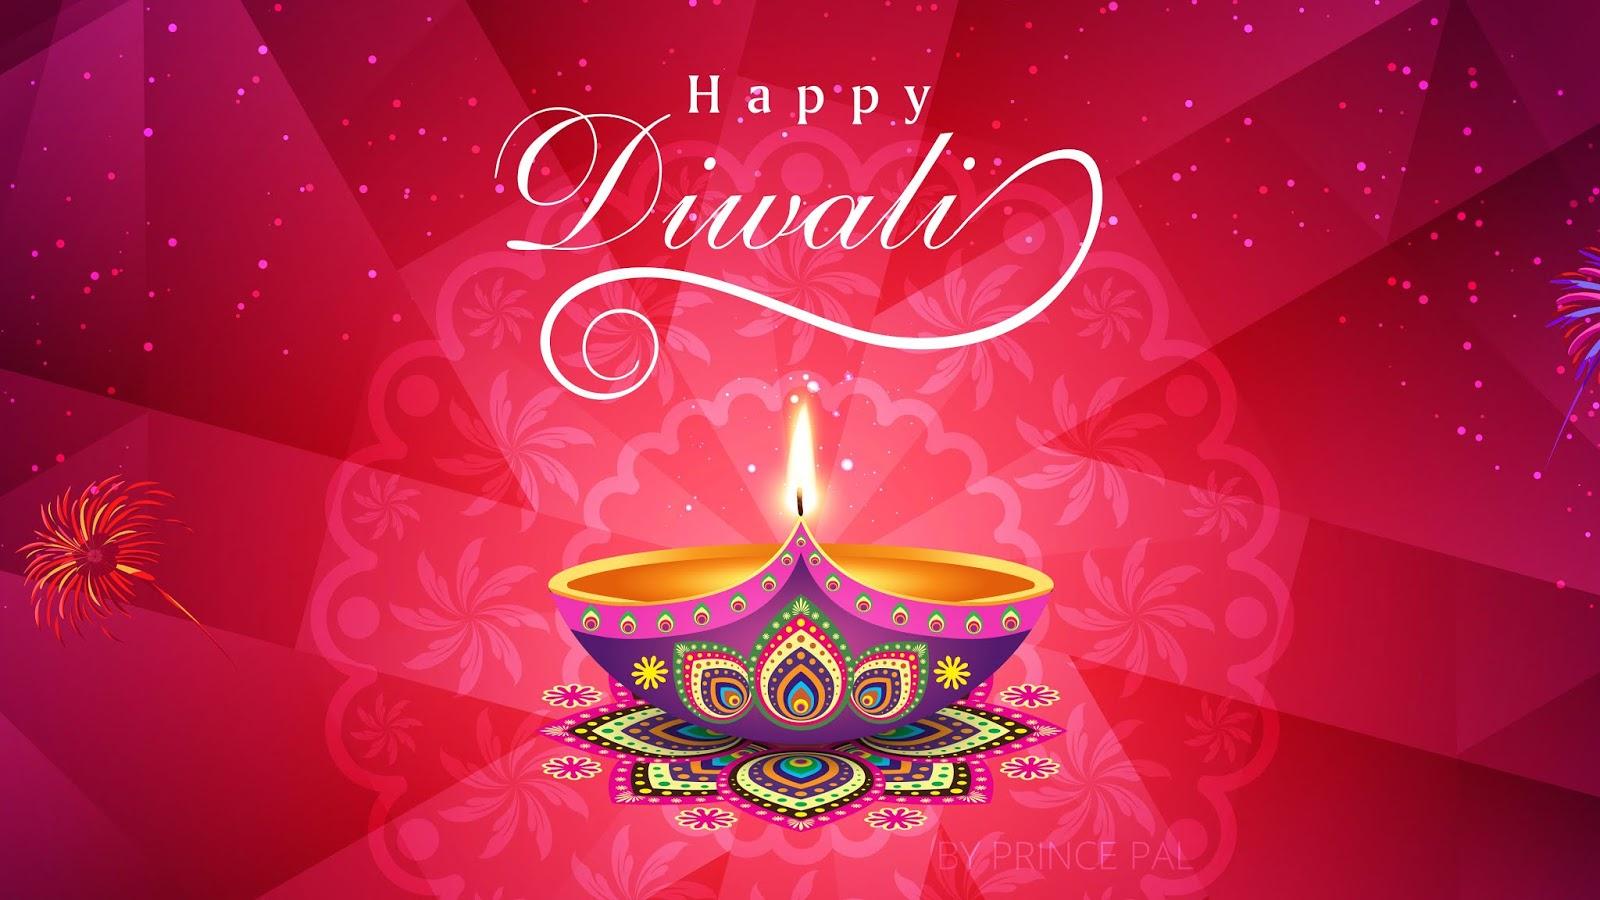 Happy Diwali Image Wallpaper, Picture and Photo in HD